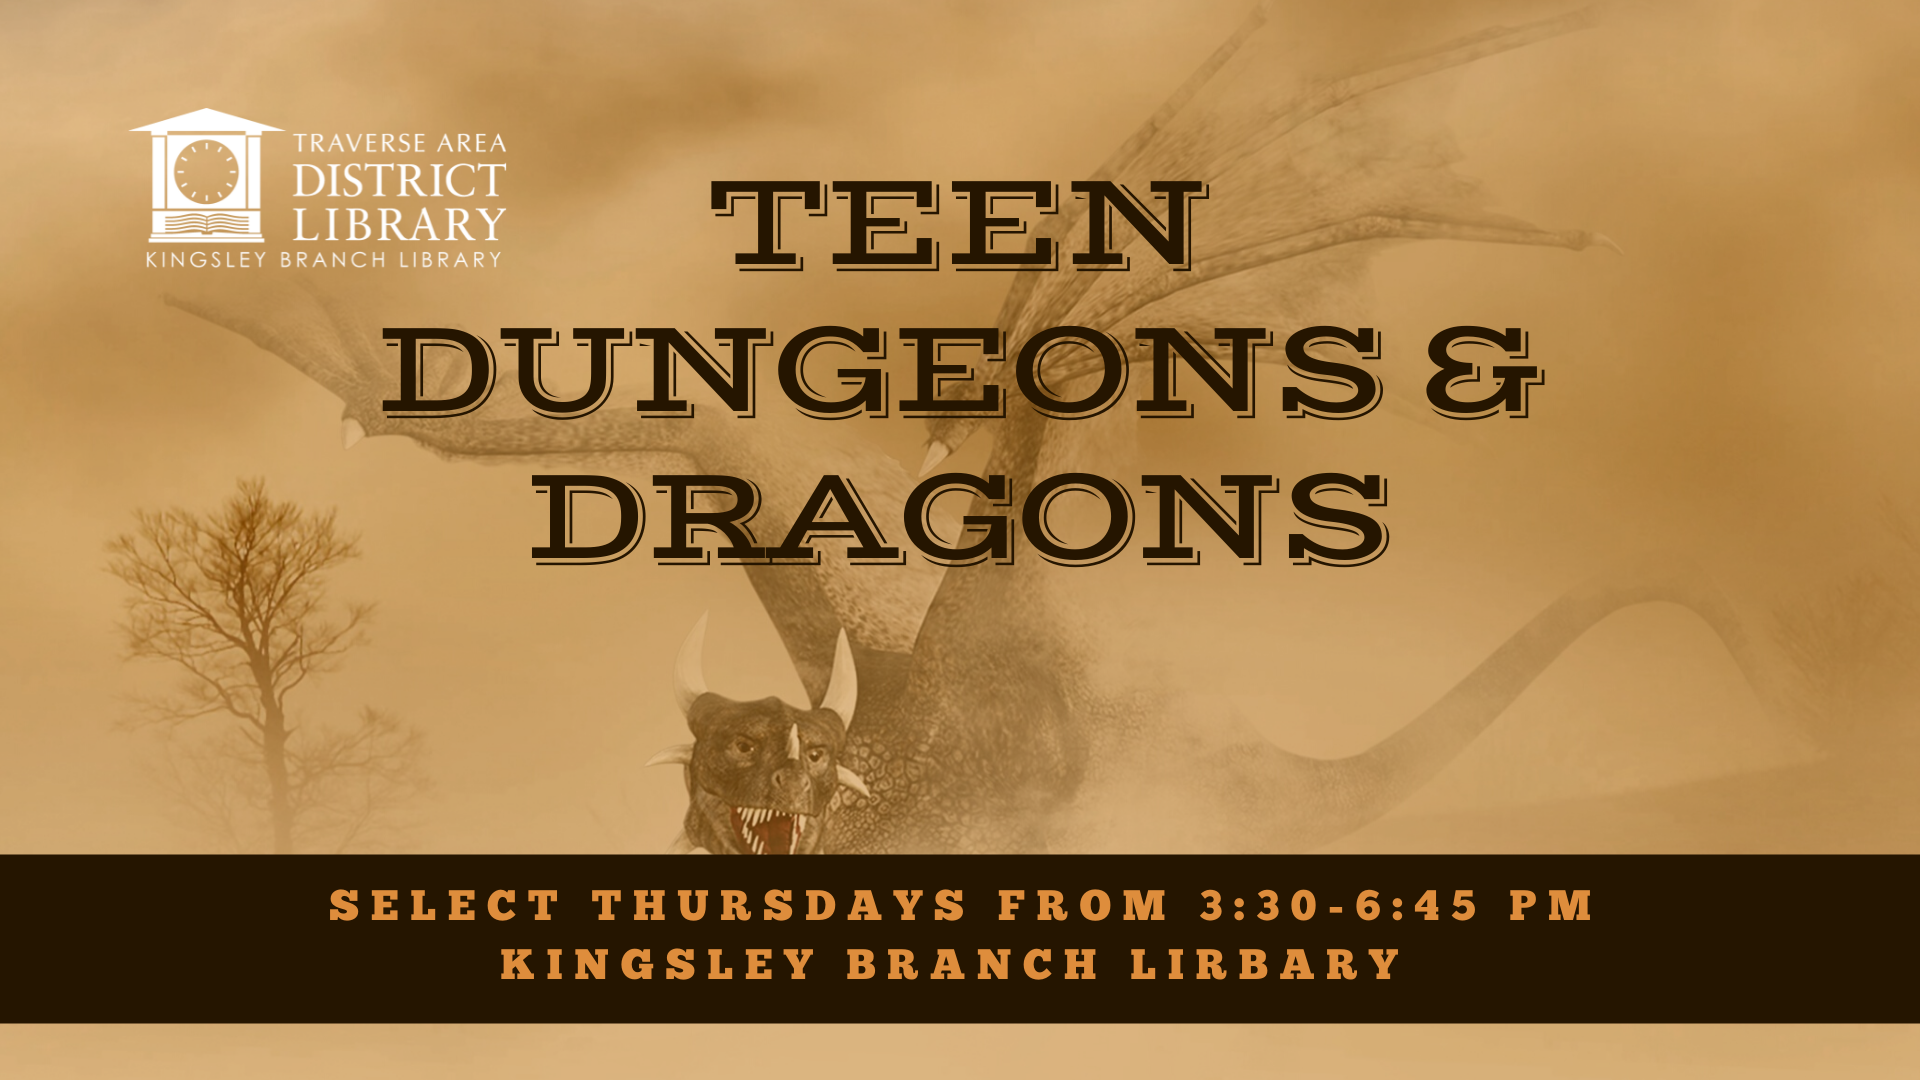 Image background of dragon with unfurled wings. Text in foreground reads teen dungeons and dragons on select Thursdays from 3:30 to 6:45 p.m. at the Kingsley Branch Library.